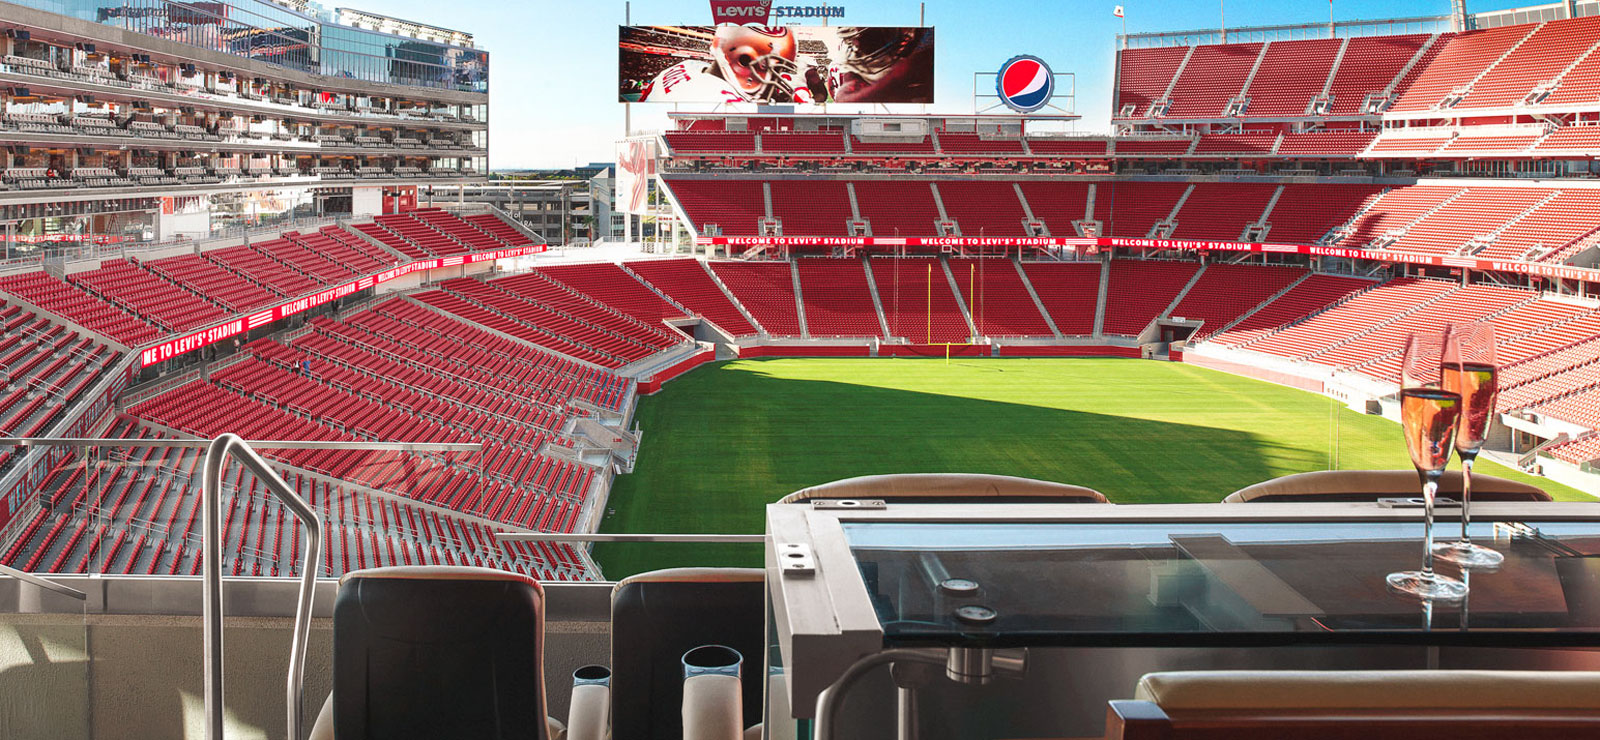 Where to Find Levi's Stadium Premium Seating and Club Options